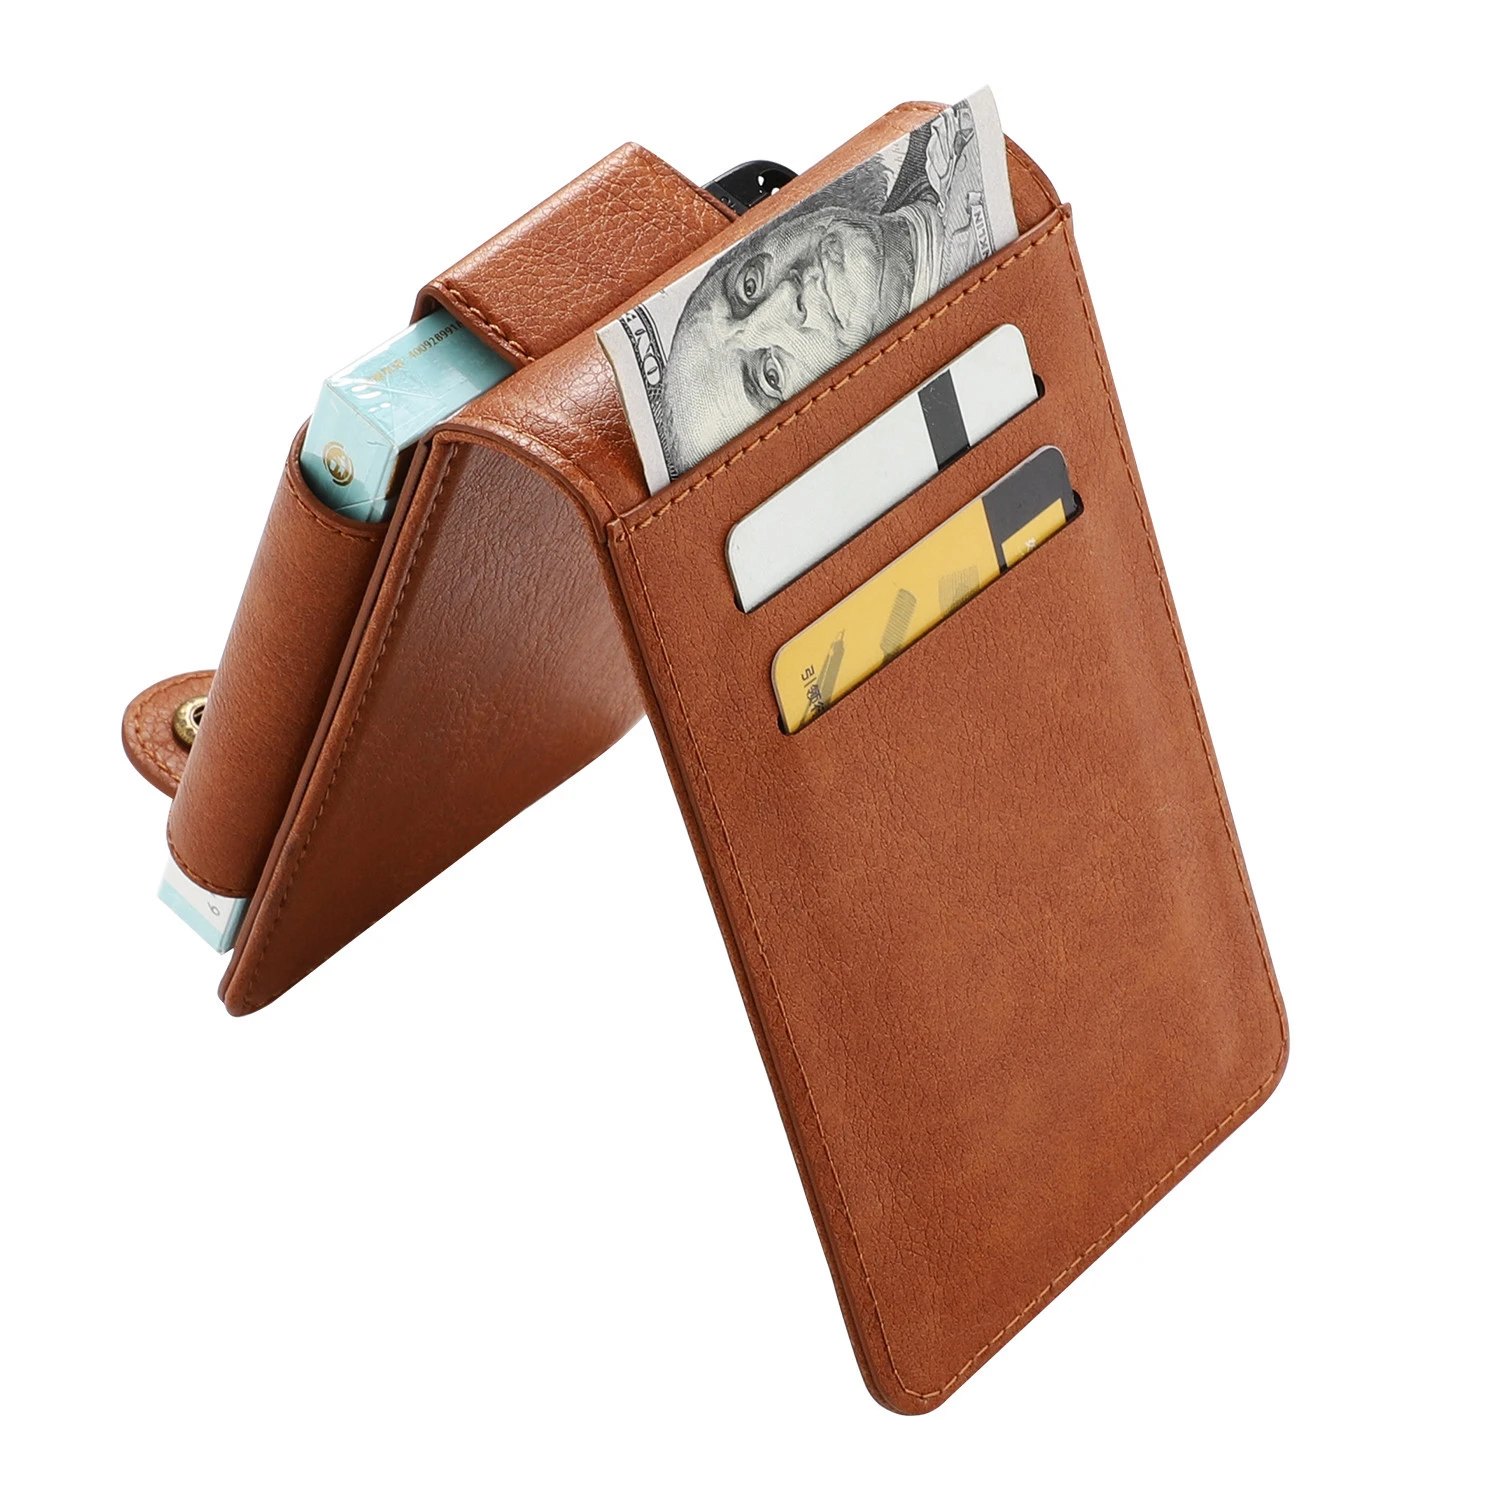 Tobacco Box  Multifunctional  Easy Carrying Pu leather Cigarette Box Wallet Case with Cards Slots for Men or Women